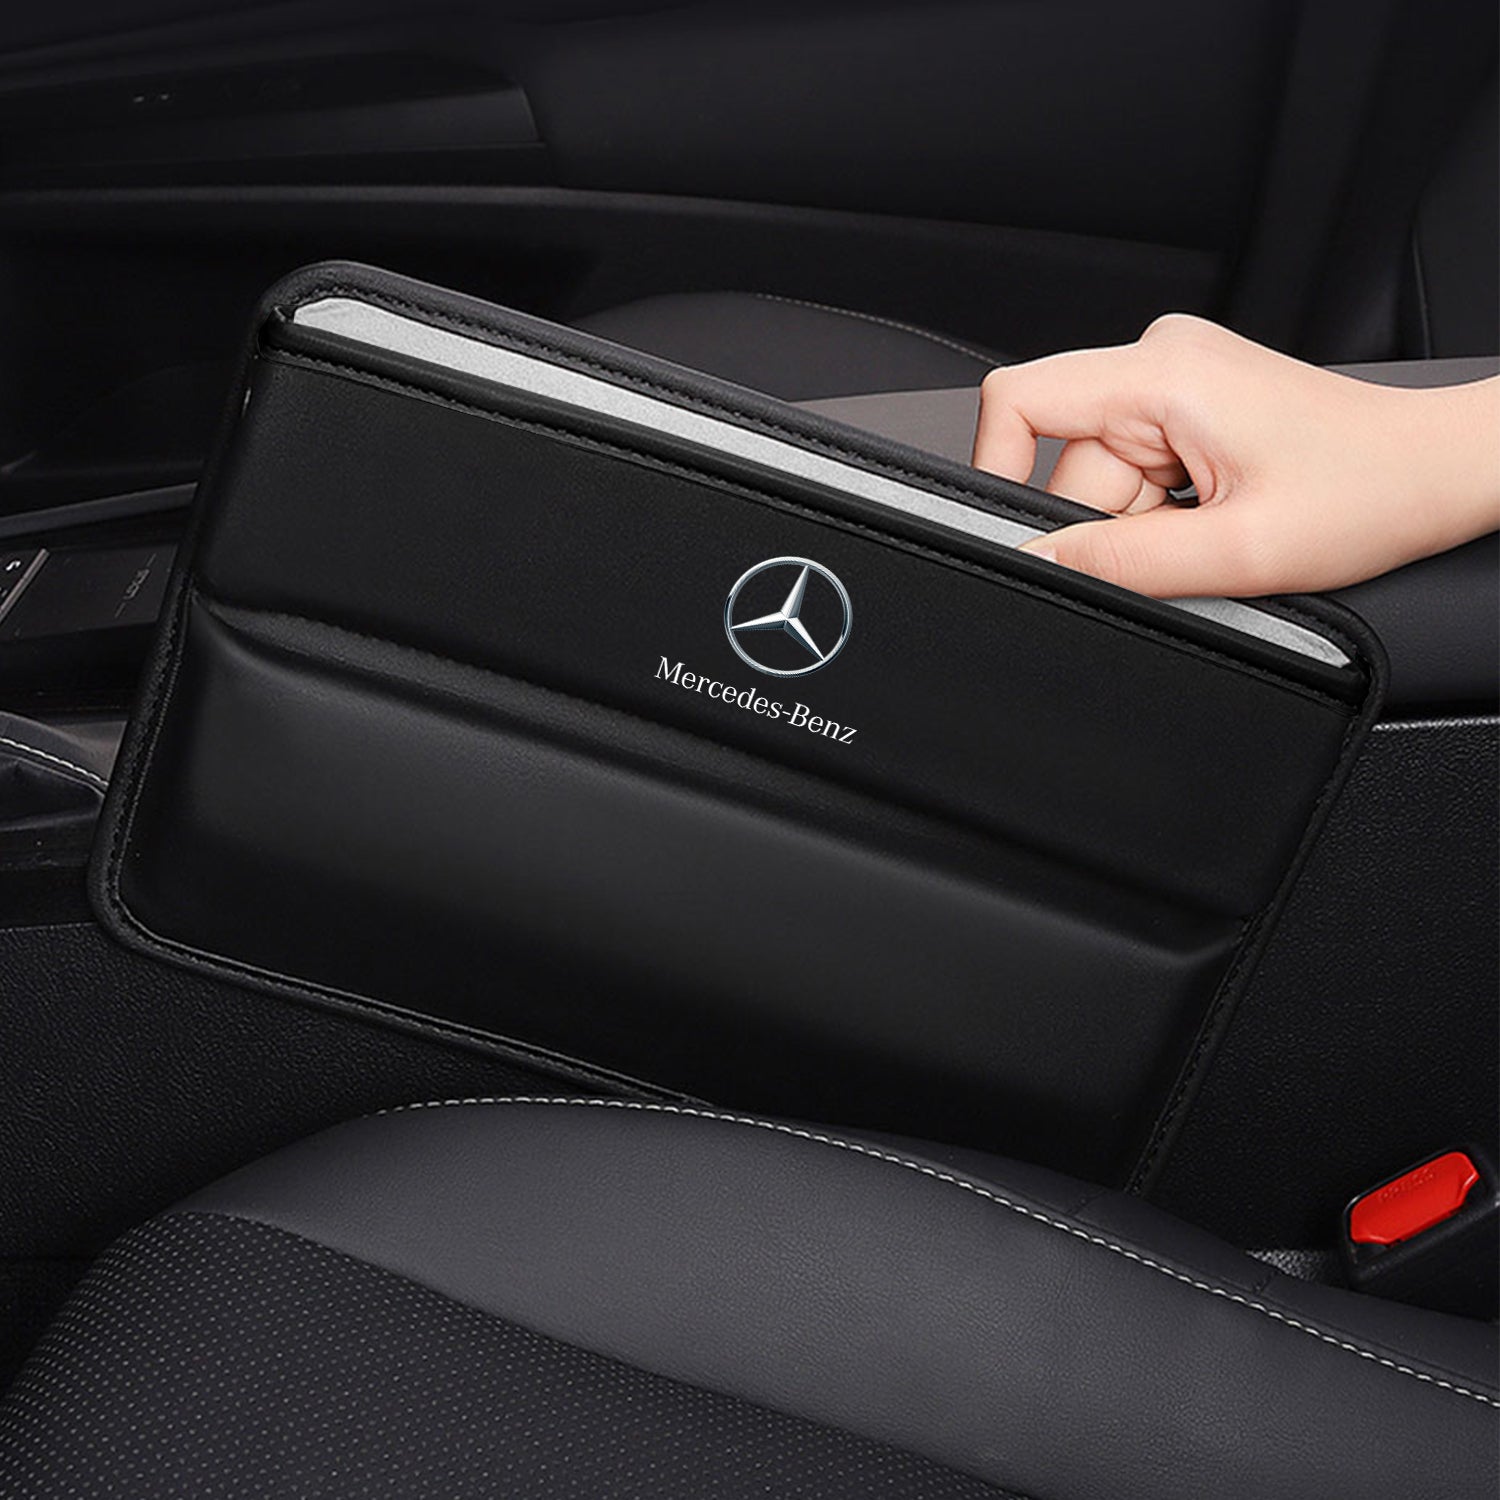 Car Seat Gap Filler Organizer, Custom For Your Cars, Multifunctional PU Leather Console Side Pocket Organizer for Cellphones, Cards, Wallets, Keys